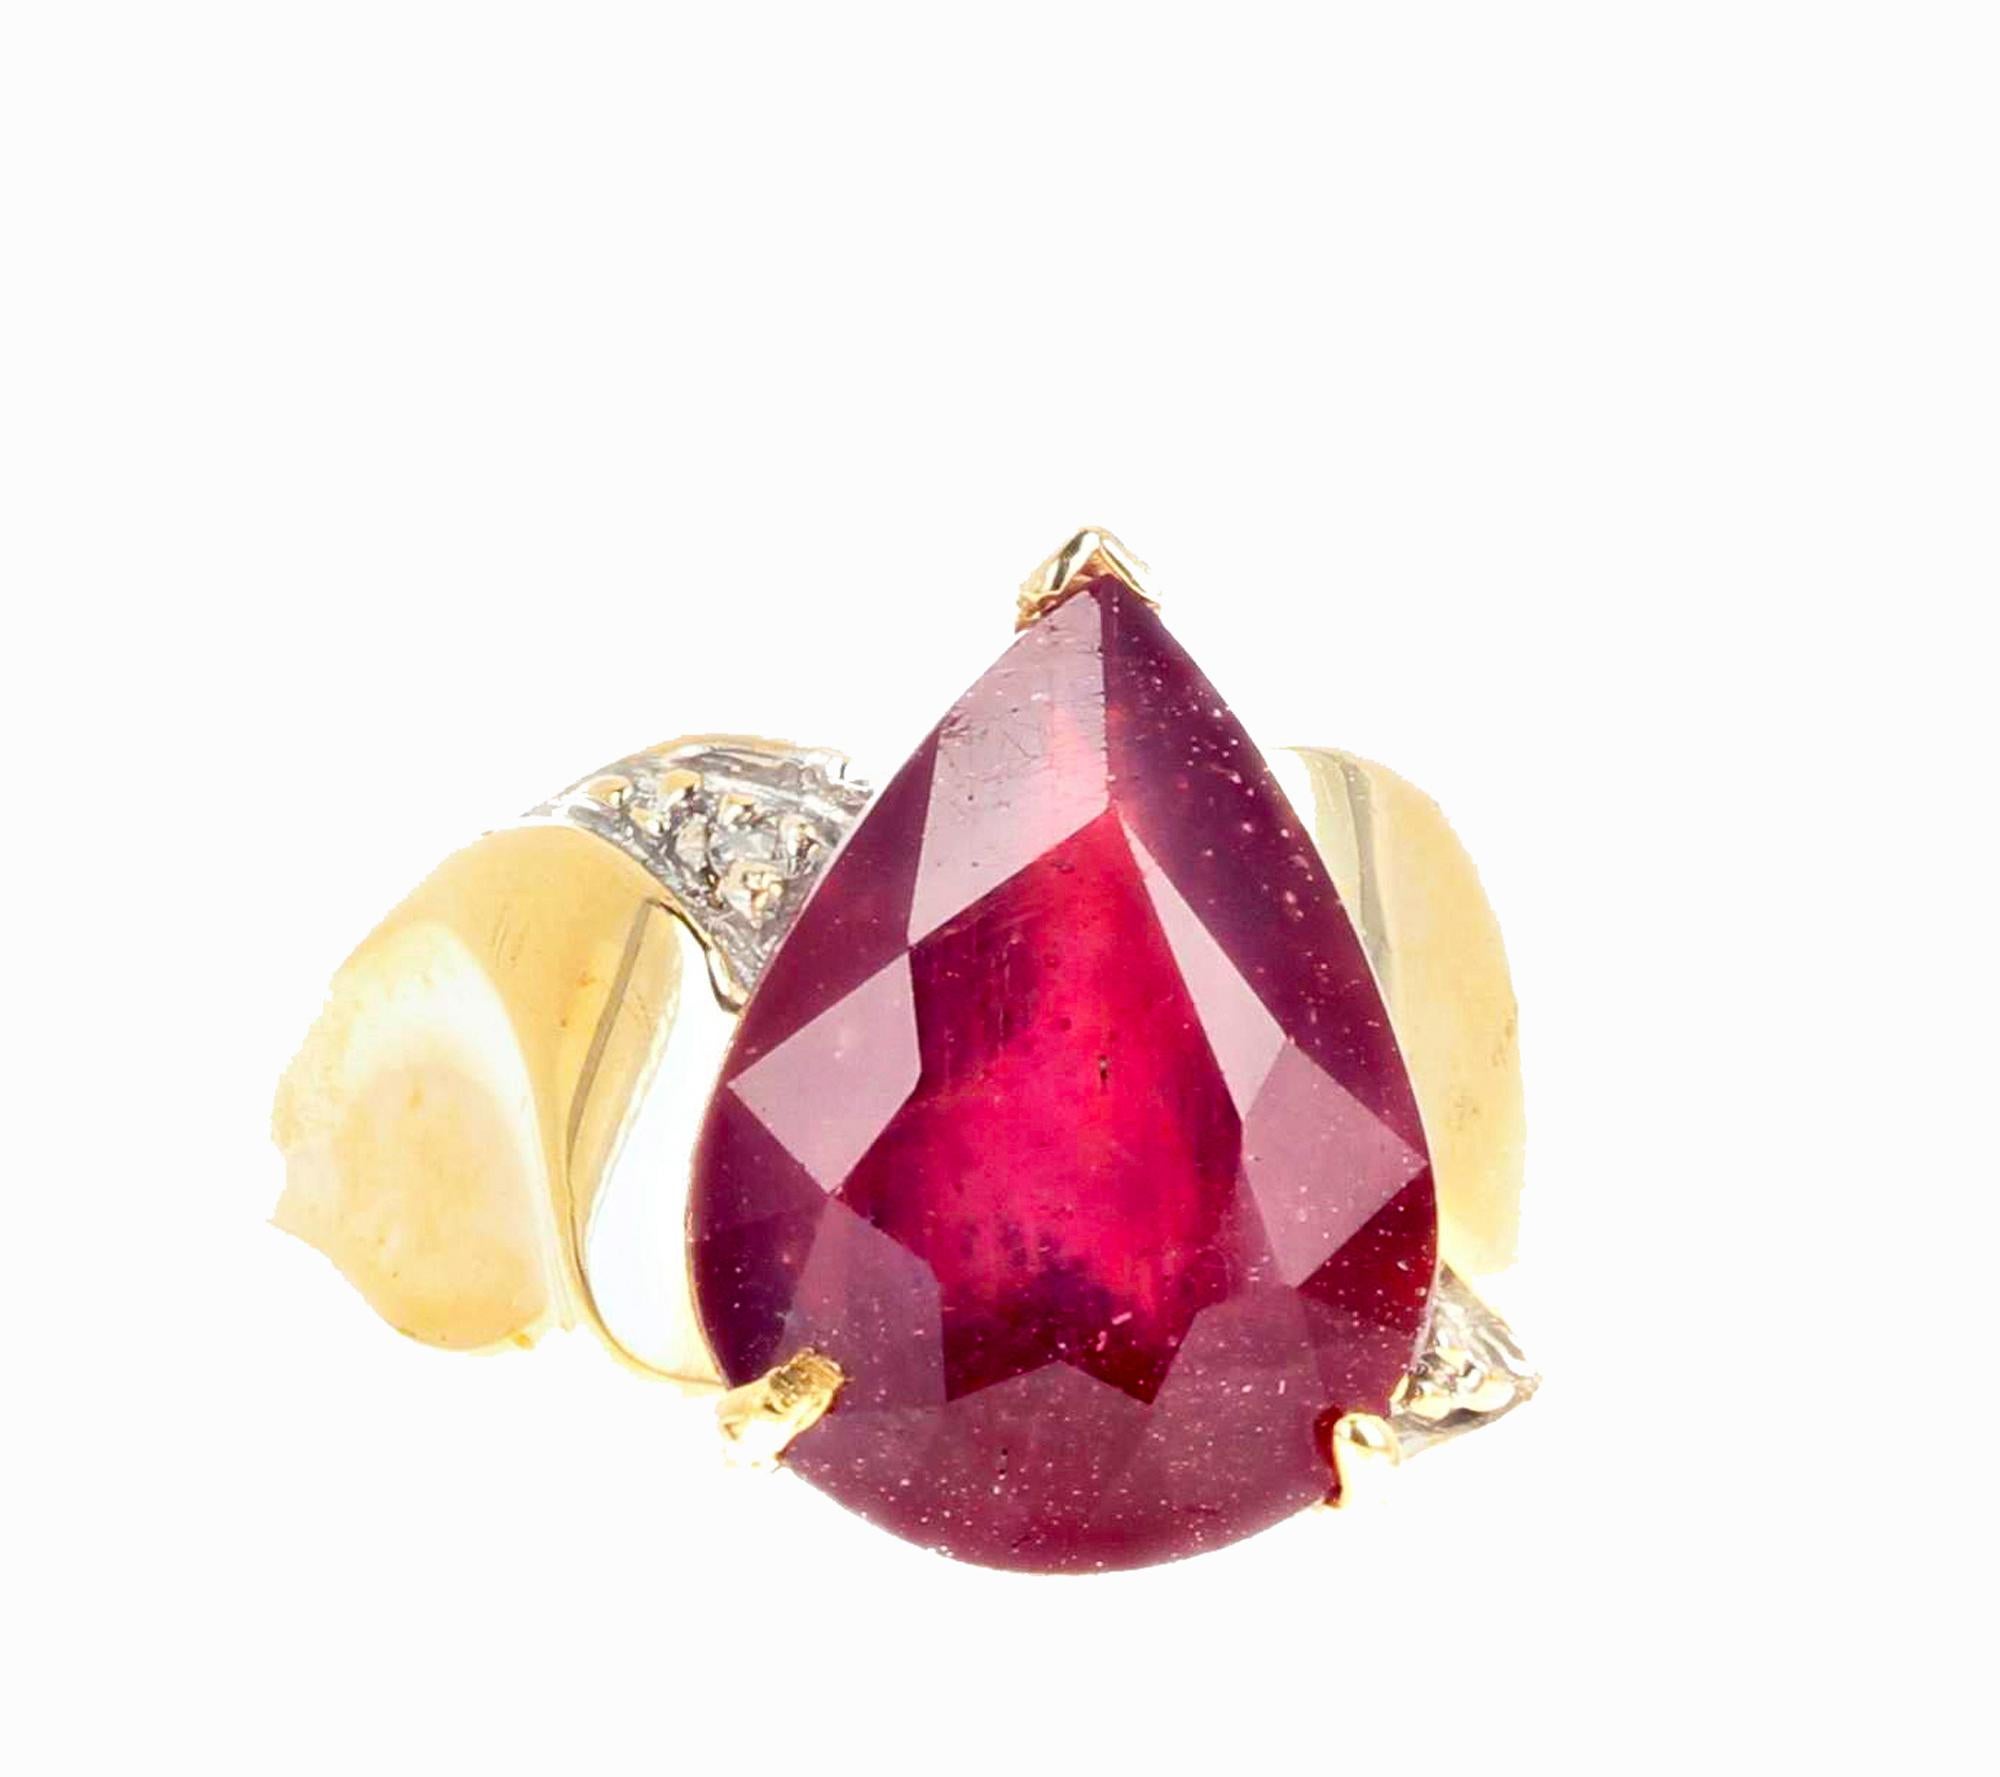 Pear Cut AJD Intense GLOWING Red 7.78 Ct. Natural Sapphire & Diamond 14K Yellow Gold Ring For Sale